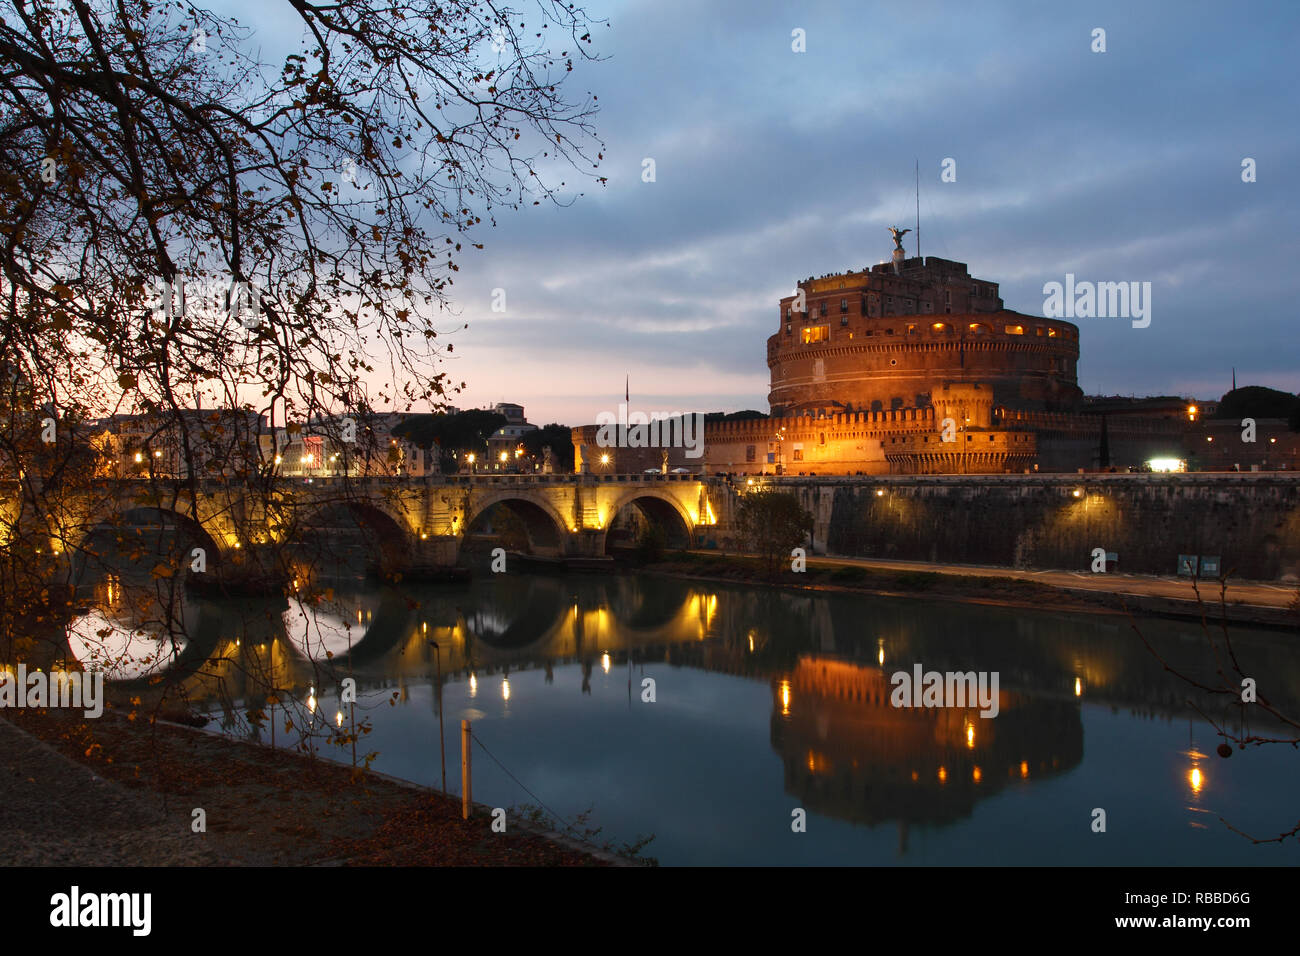 Reflection of Sant'angelo castle at dusk. Rome city Stock Photo